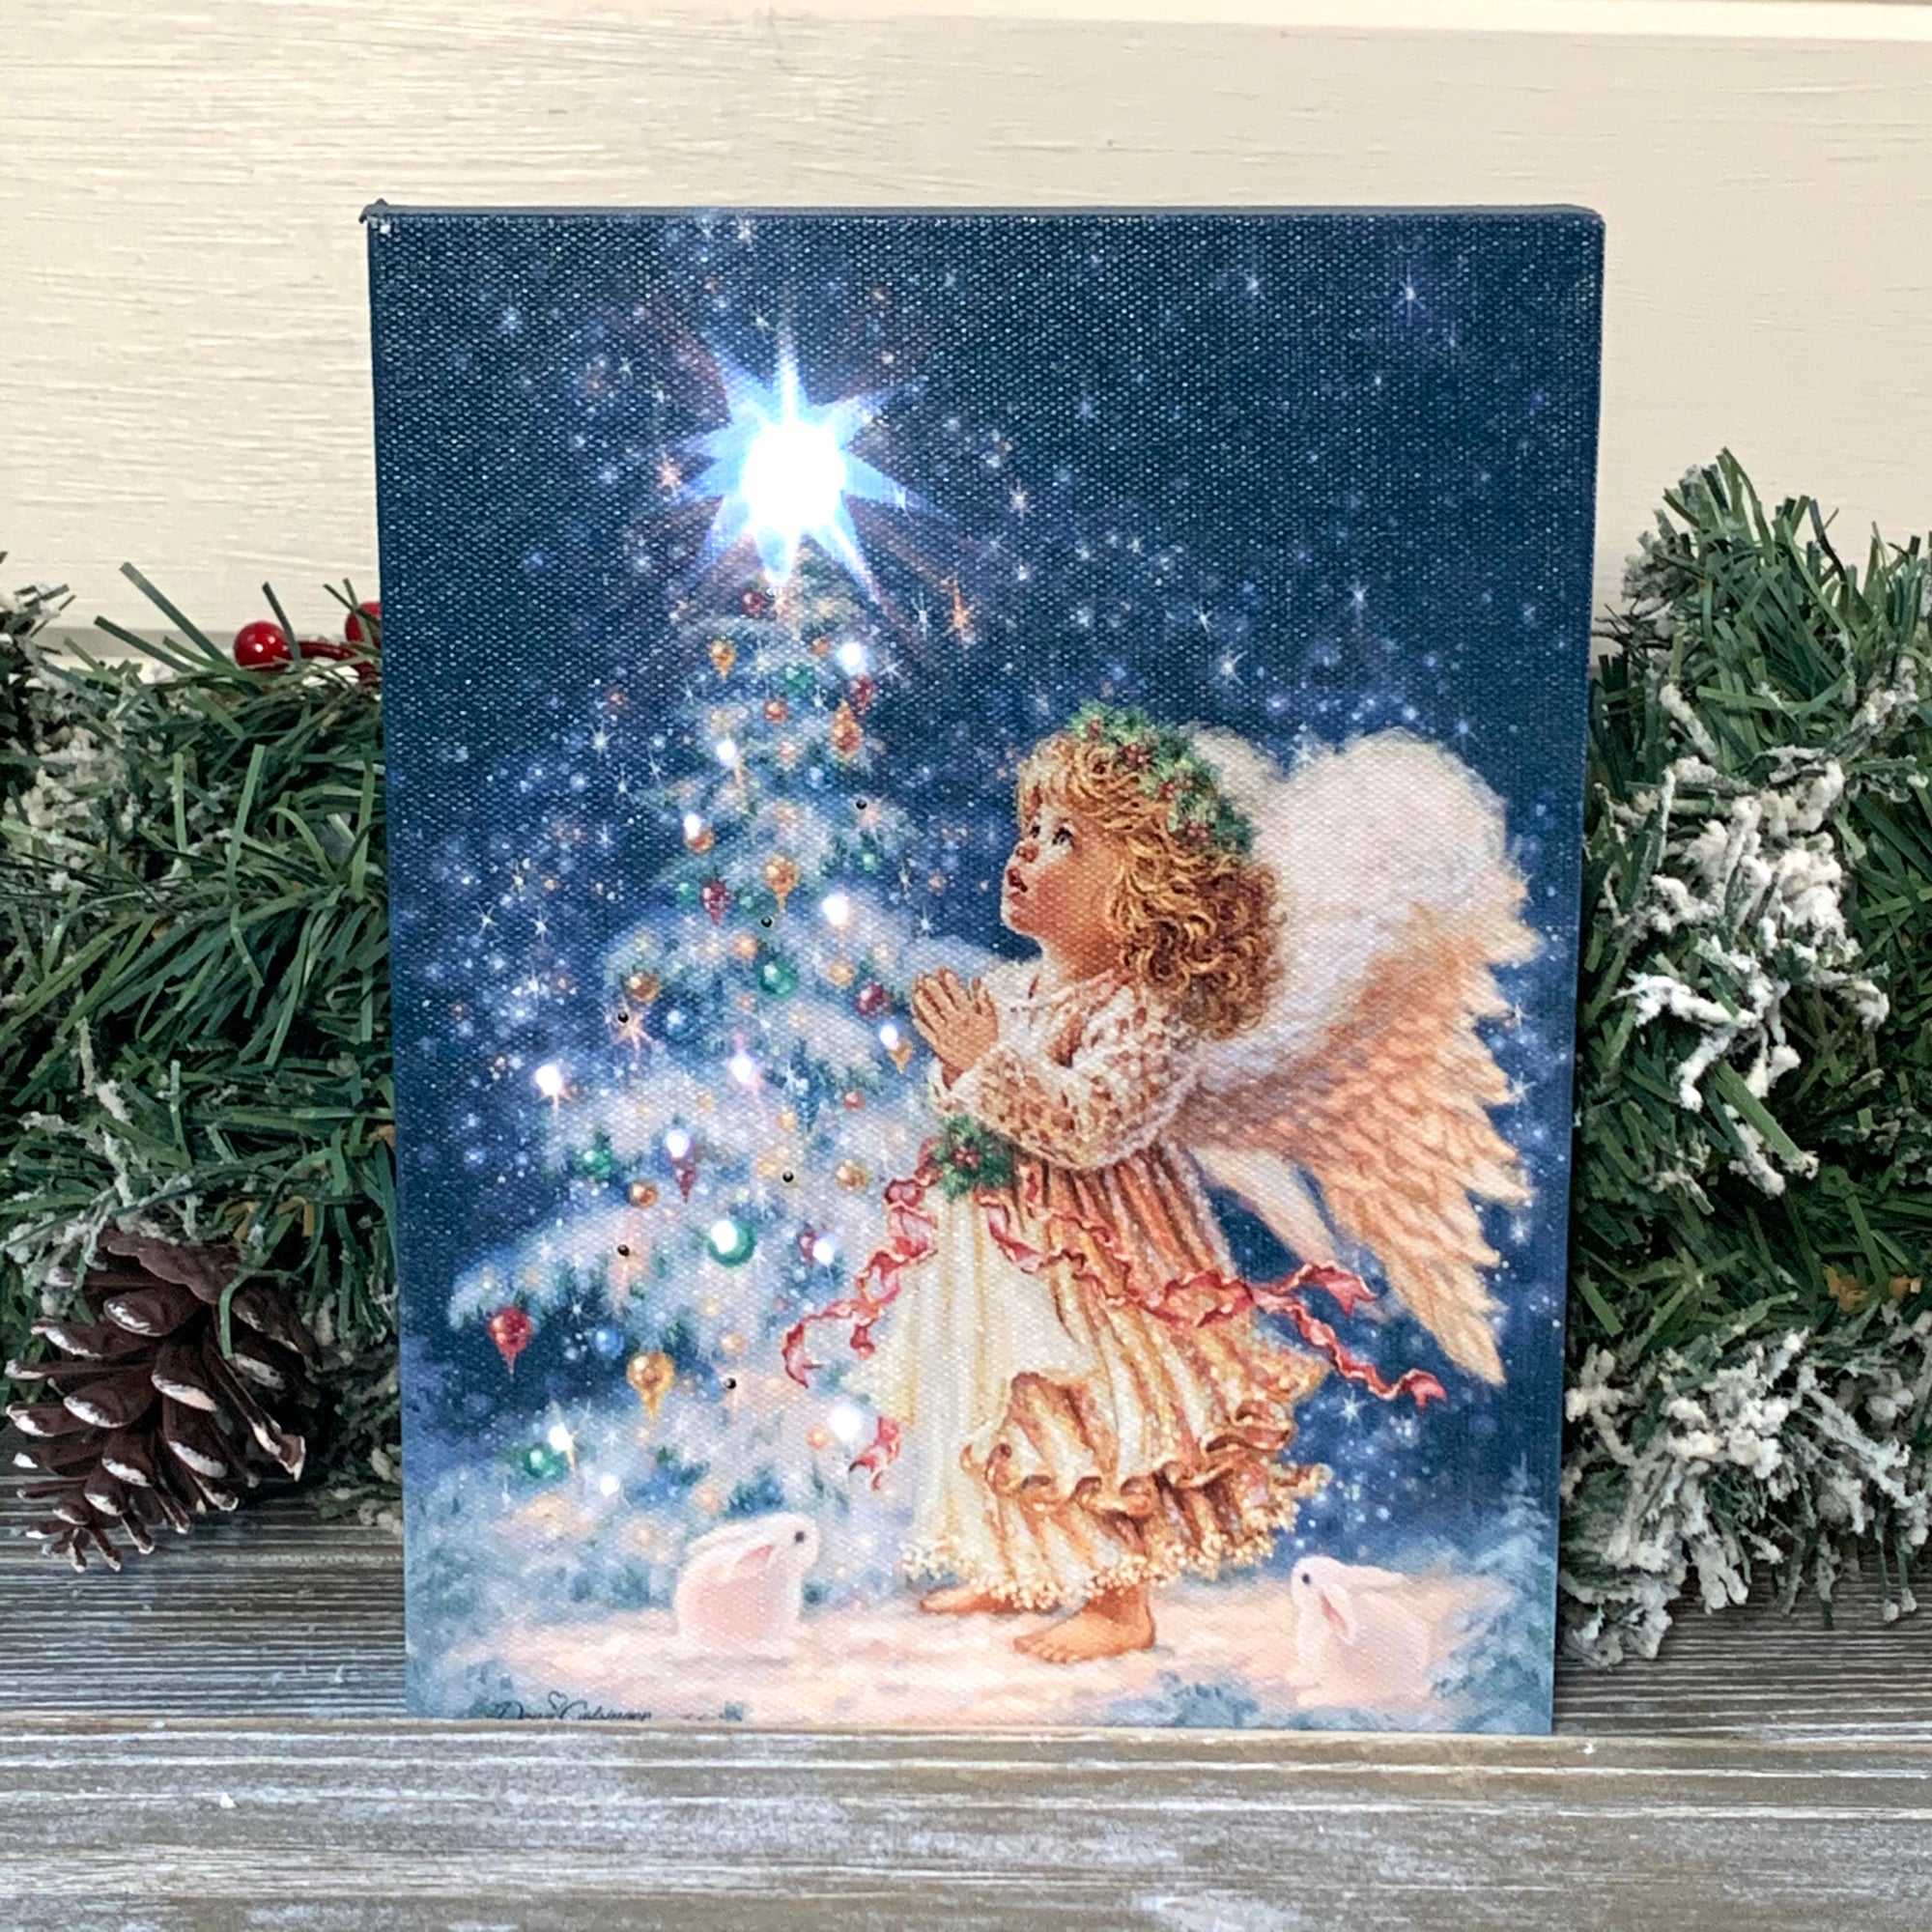 This enchanting piece captures the essence of winter wonderland with a young angel standing in front of a snow-covered and beautifully lit Christmas tree, adorned with sparkling ornaments and a shining star at the top.  As the snow falls gently around her, the angel's hands are pressed together in prayerful reverence, as if making a wish for all the blessings of the season.